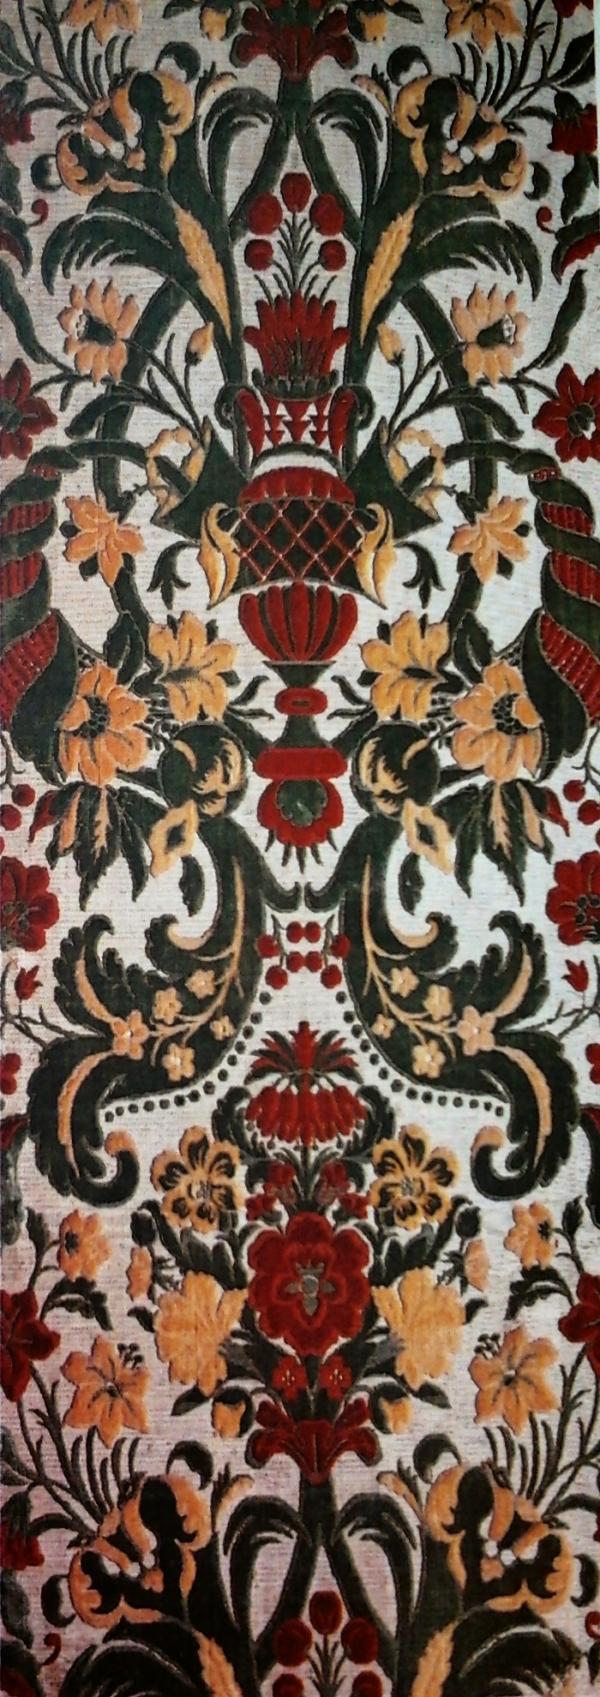 A detail of the Genoa-style velvet wallpaper with silk and silver thread in the queen’s bedroom. (Public Domain)